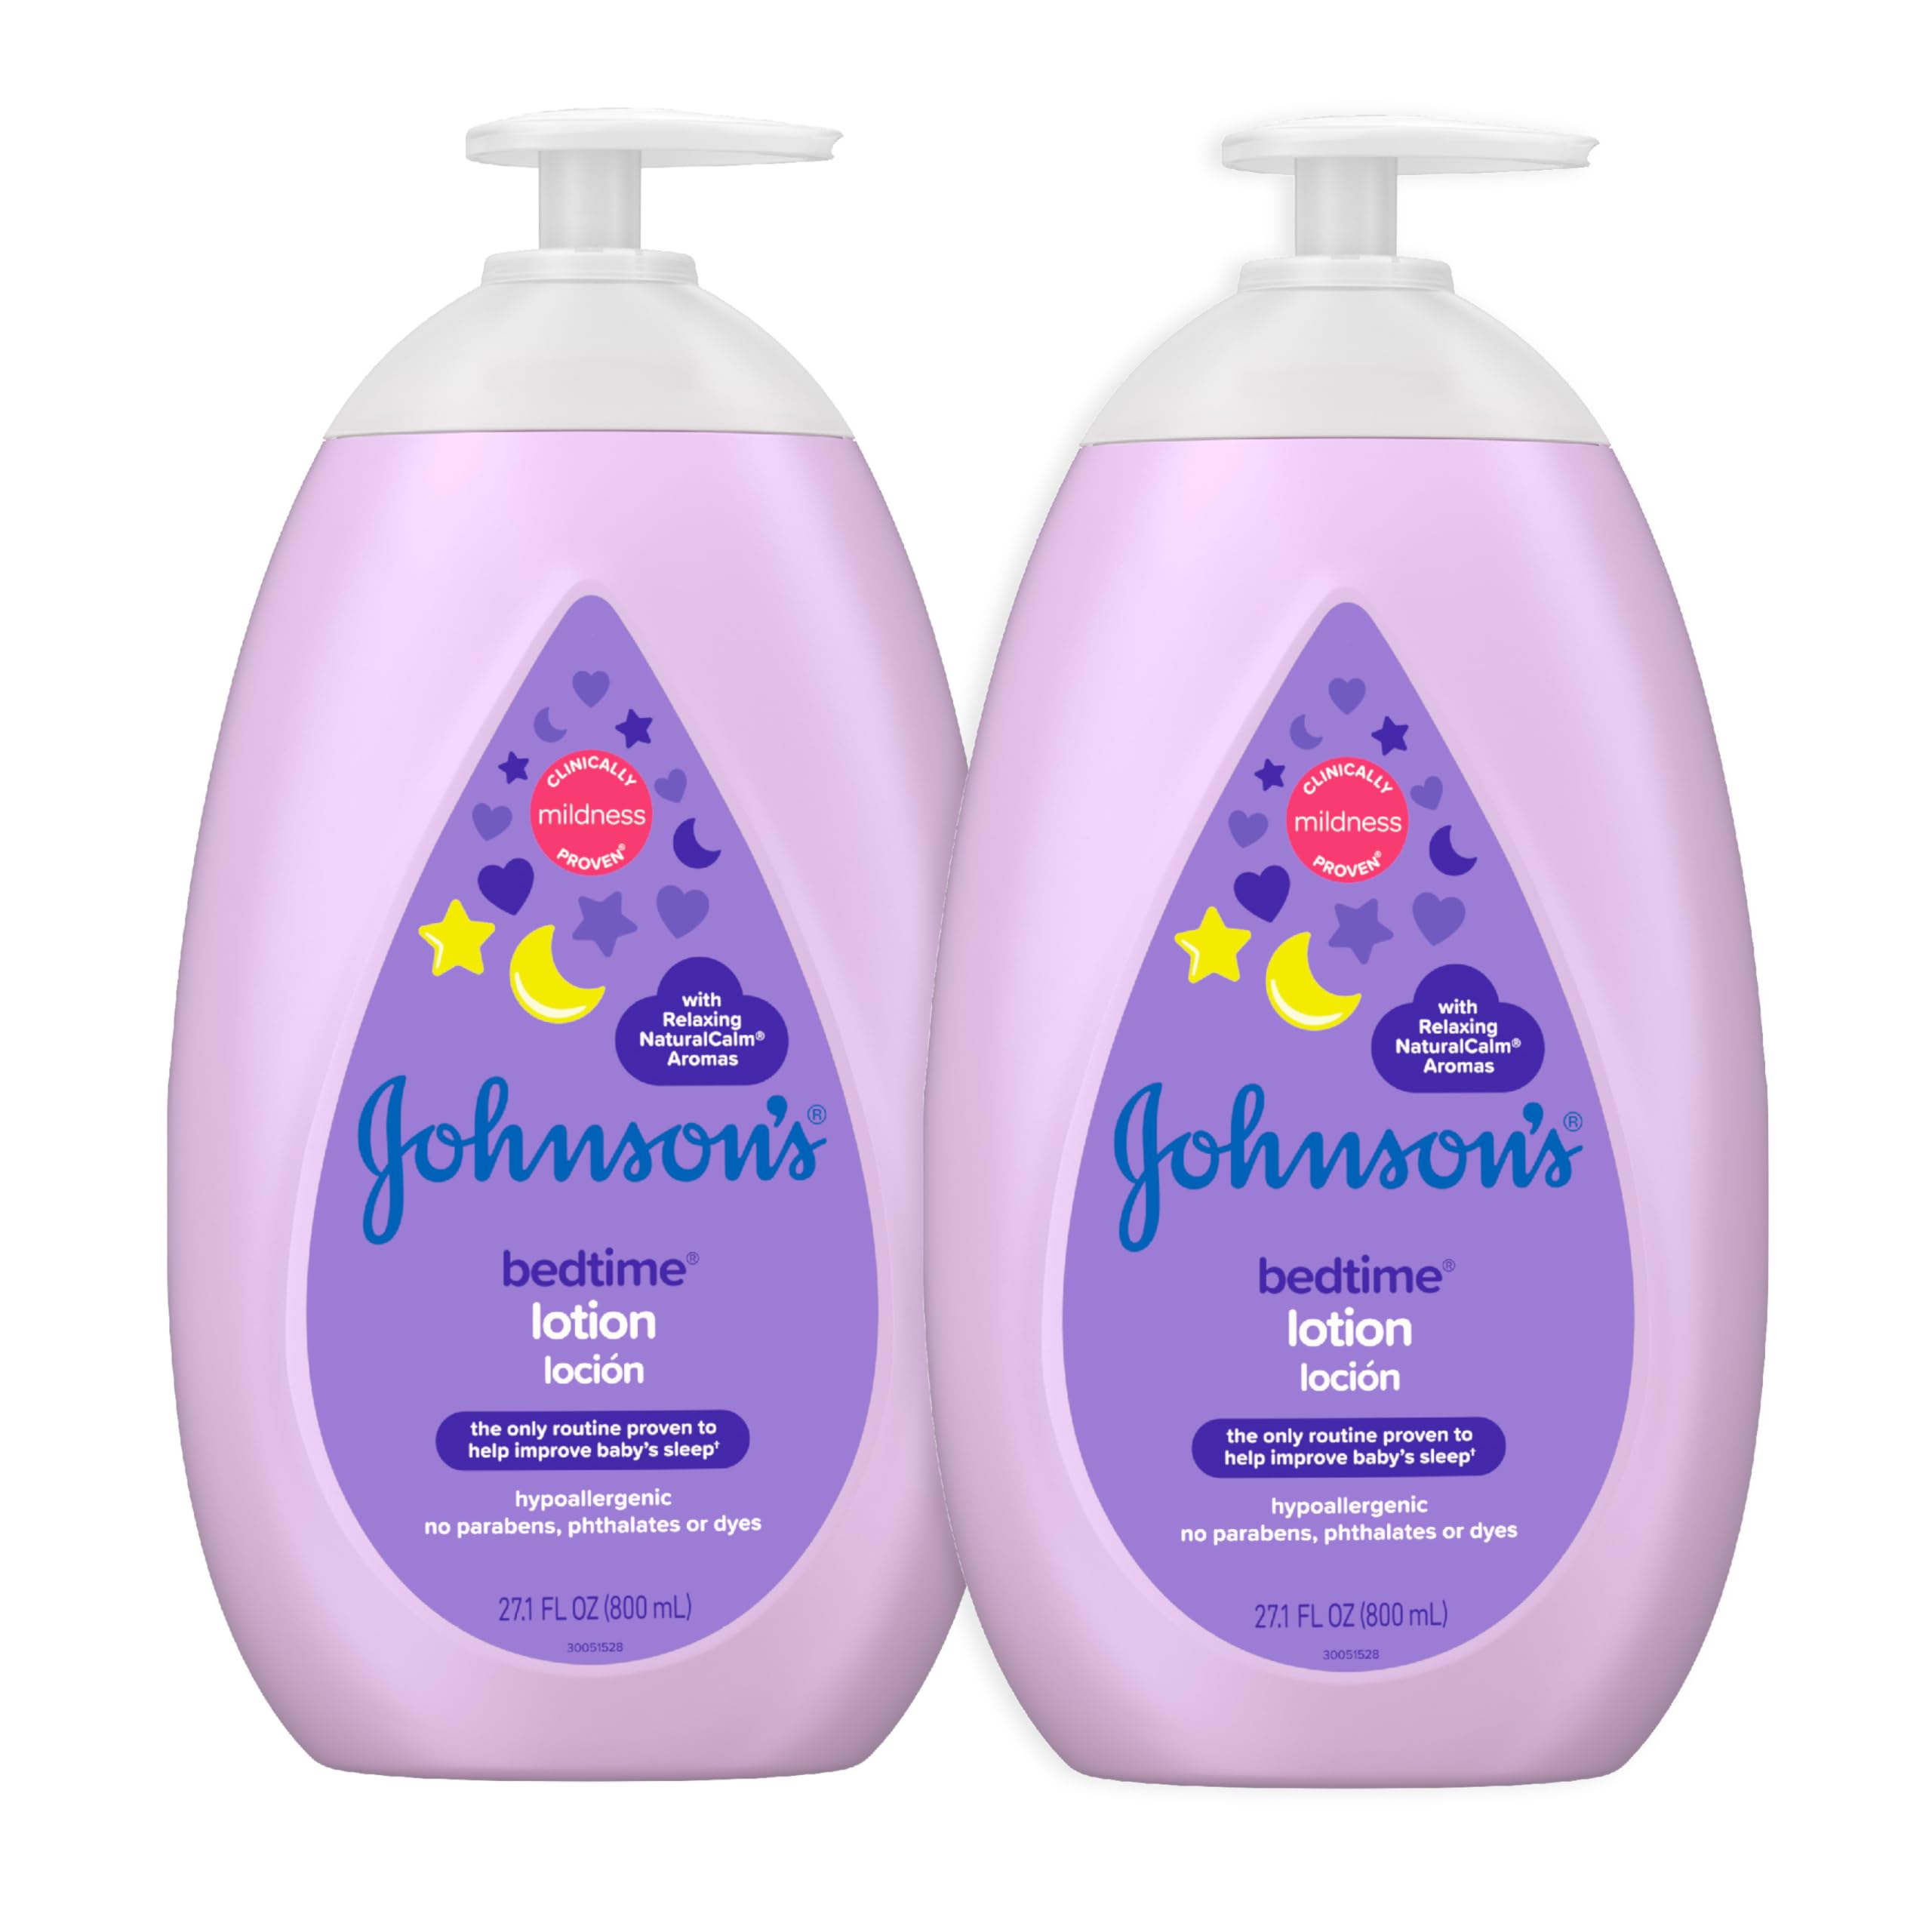 Johnson's Moisturizing Bedtime Baby Lotion with Coconut Oil & NaturalCalm Aromas to Help Relax Baby, Mild, Hypoallergenic & Paraben-, Phthalate- & Dye-Free, Twin Pack, 2 x 27.1 fl. oz